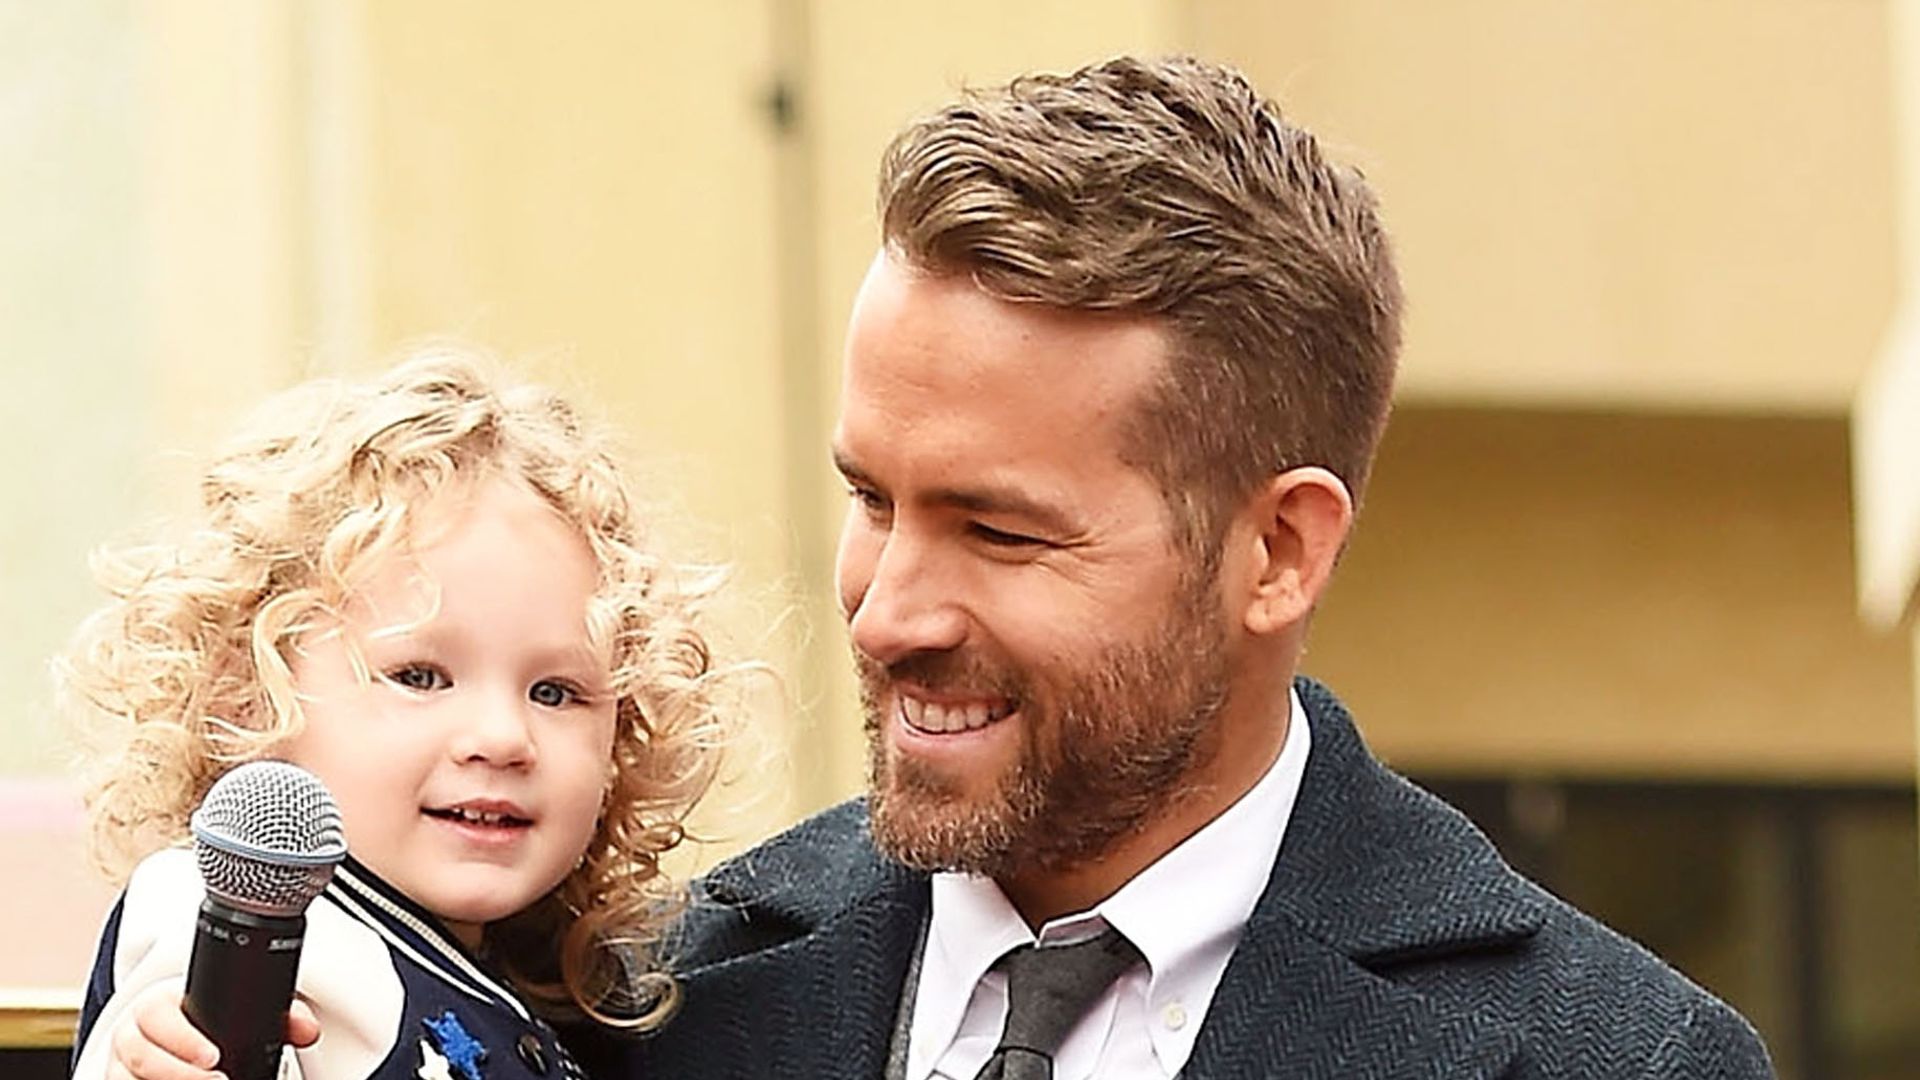 Actor Ryan Reynolds (R) poses for a photo with his daughter, James Reynolds during a ceremony honoring him with a star on the Hollywood Walk of Fame on December 15, 2016 in Hollywood, California.